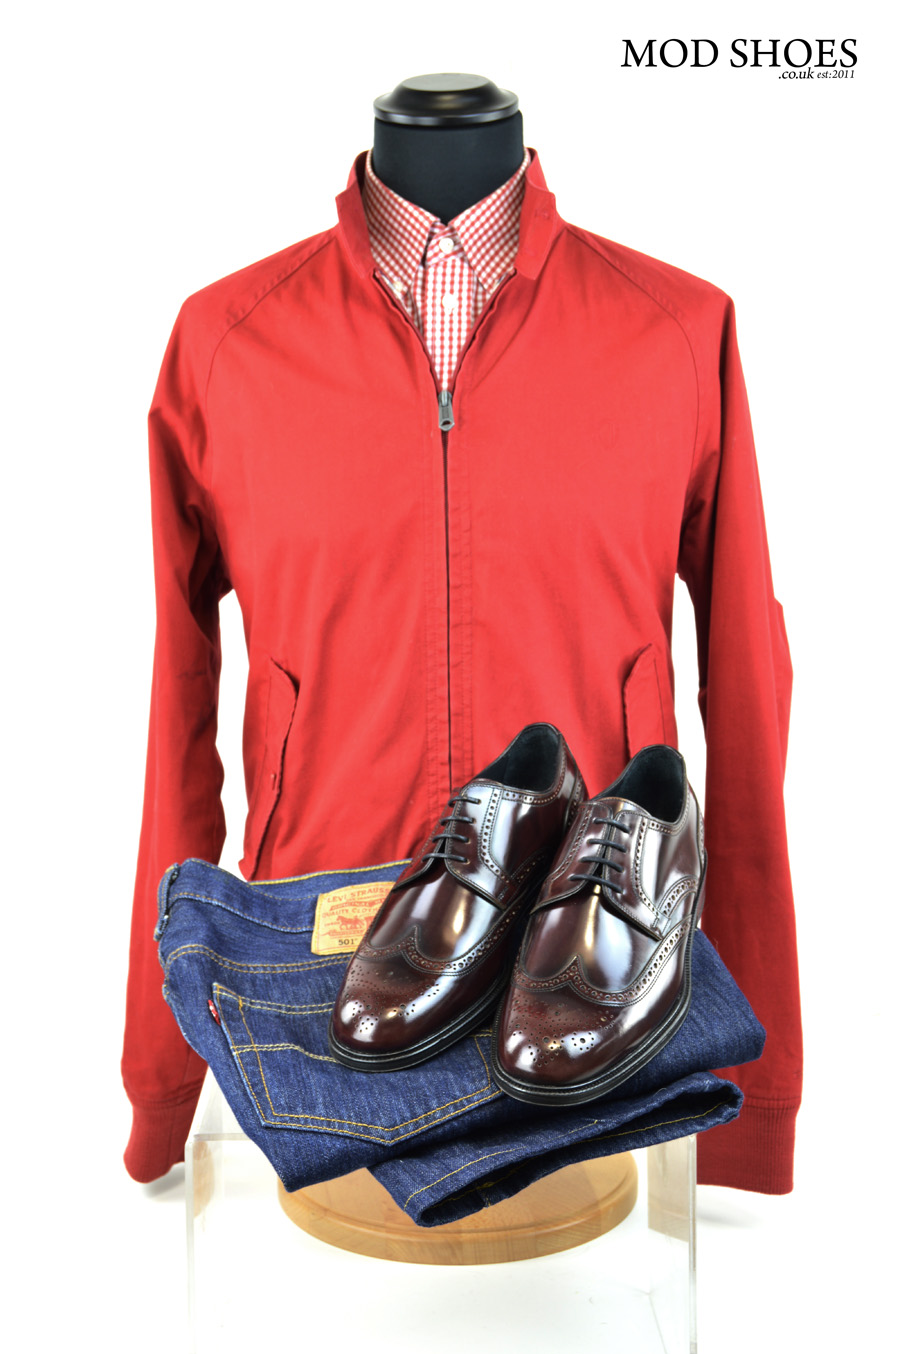 modshoes oxblood brogues with jeans harrington